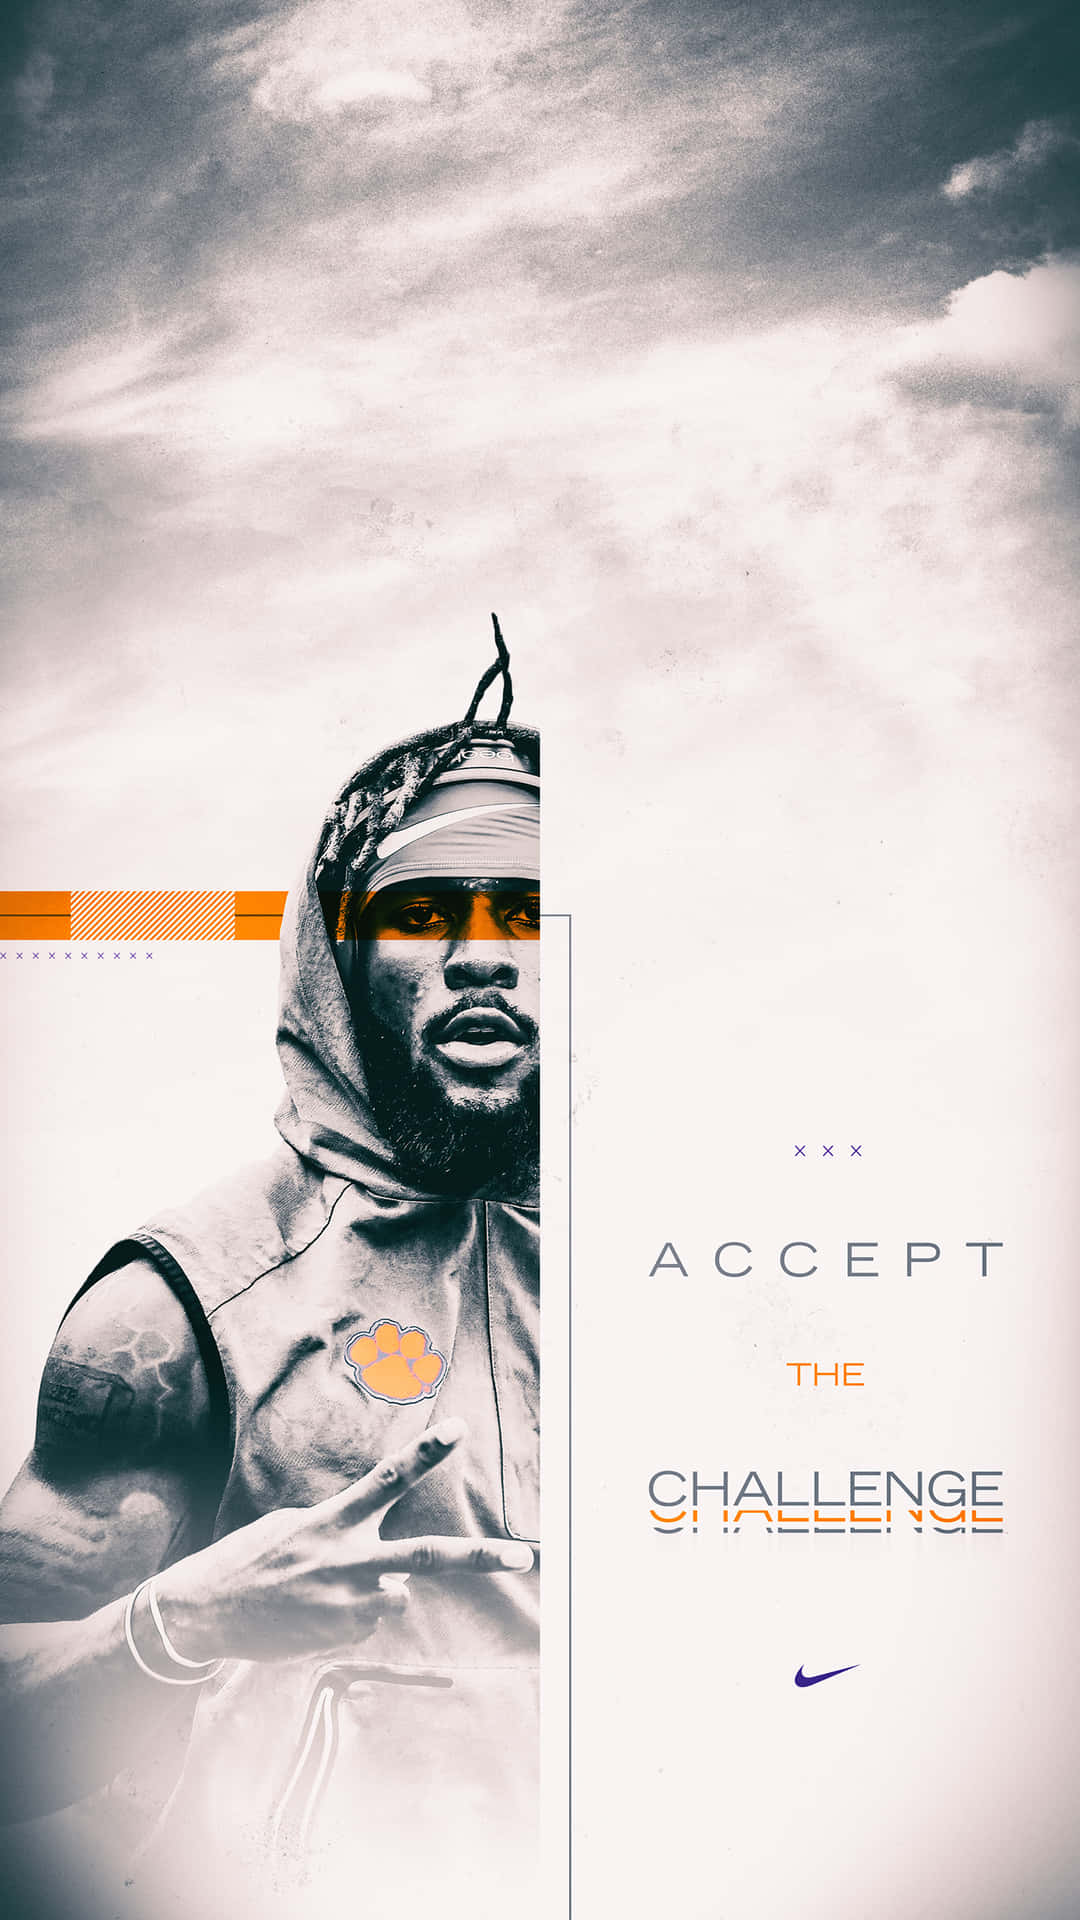 Nike Hd Wallpapers - Accept The Challenge Wallpaper